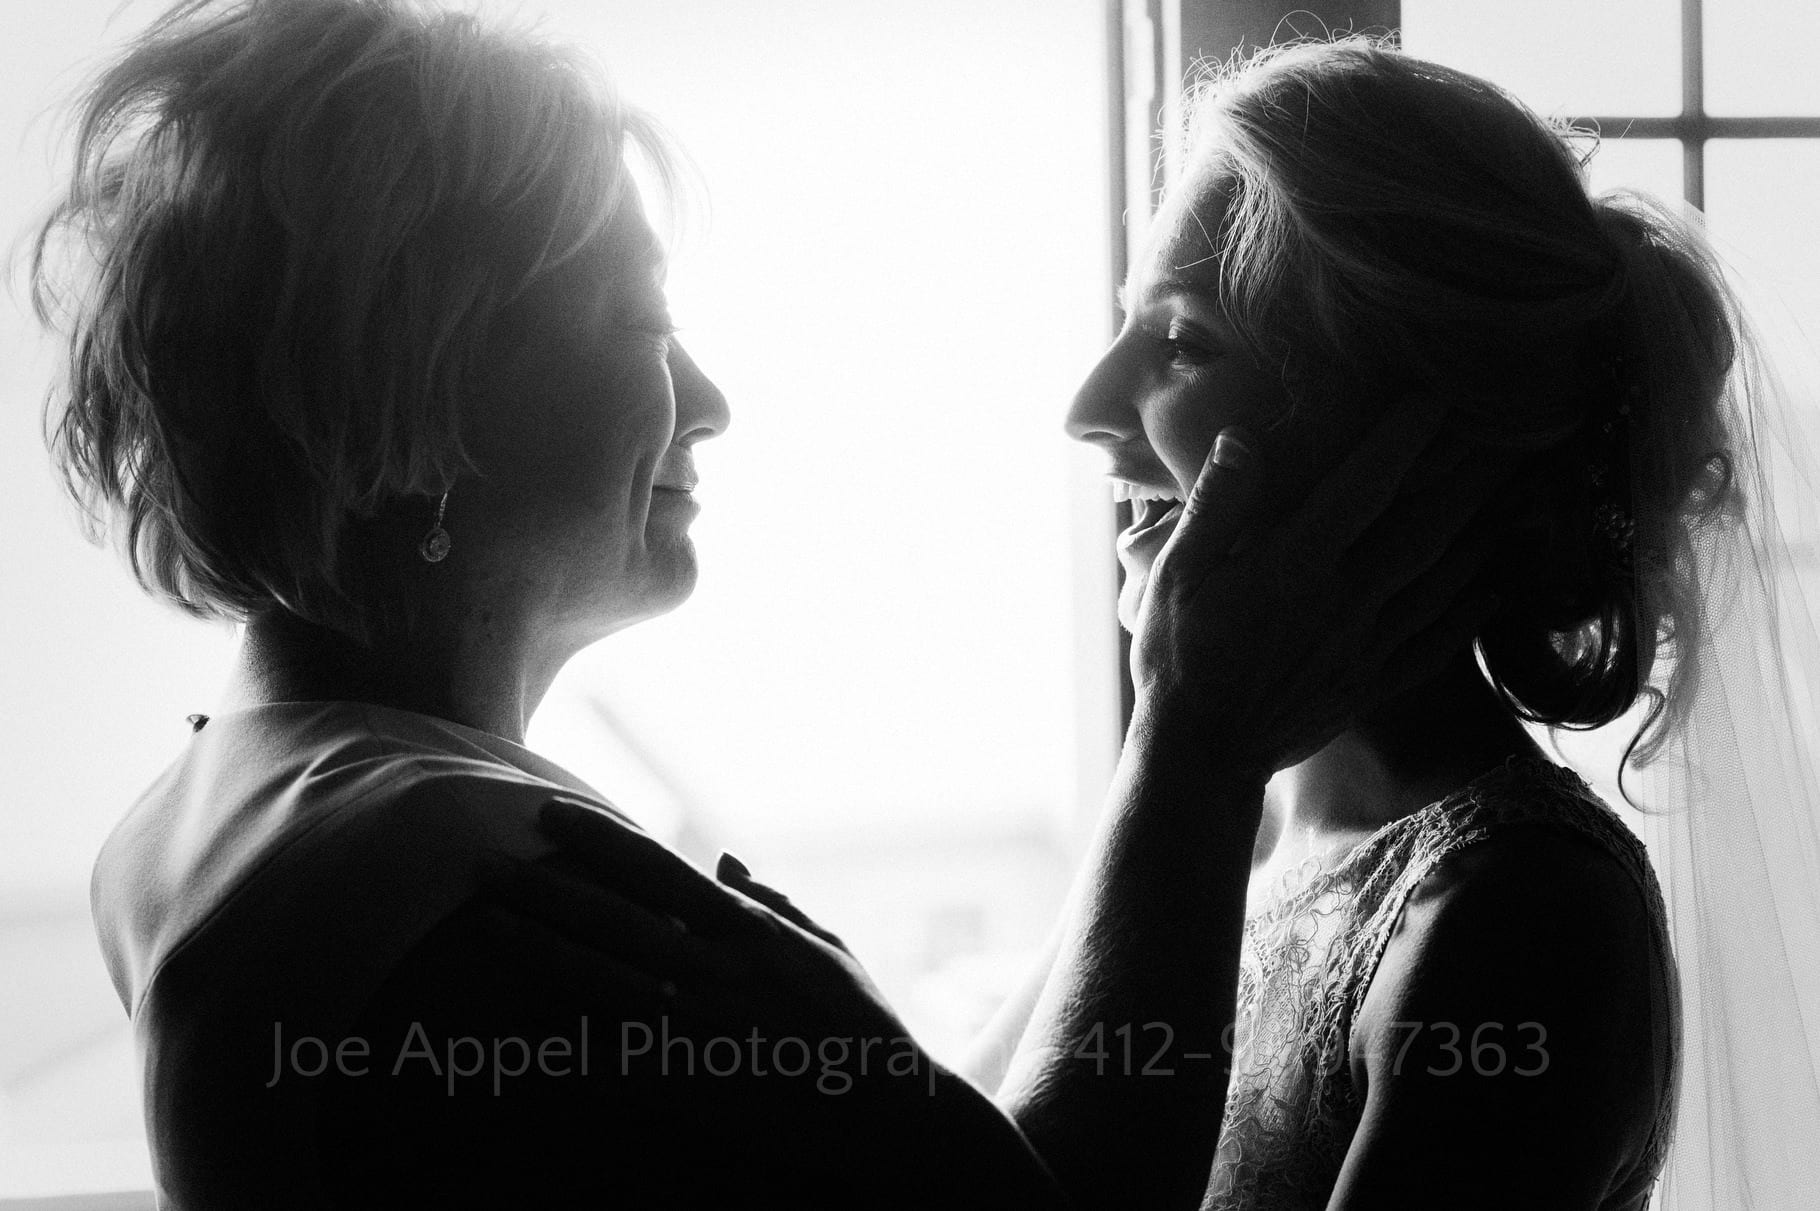 Black and white photo that is almost a silhouette of a mother caressing the cheek of her daughter on her wedding day.